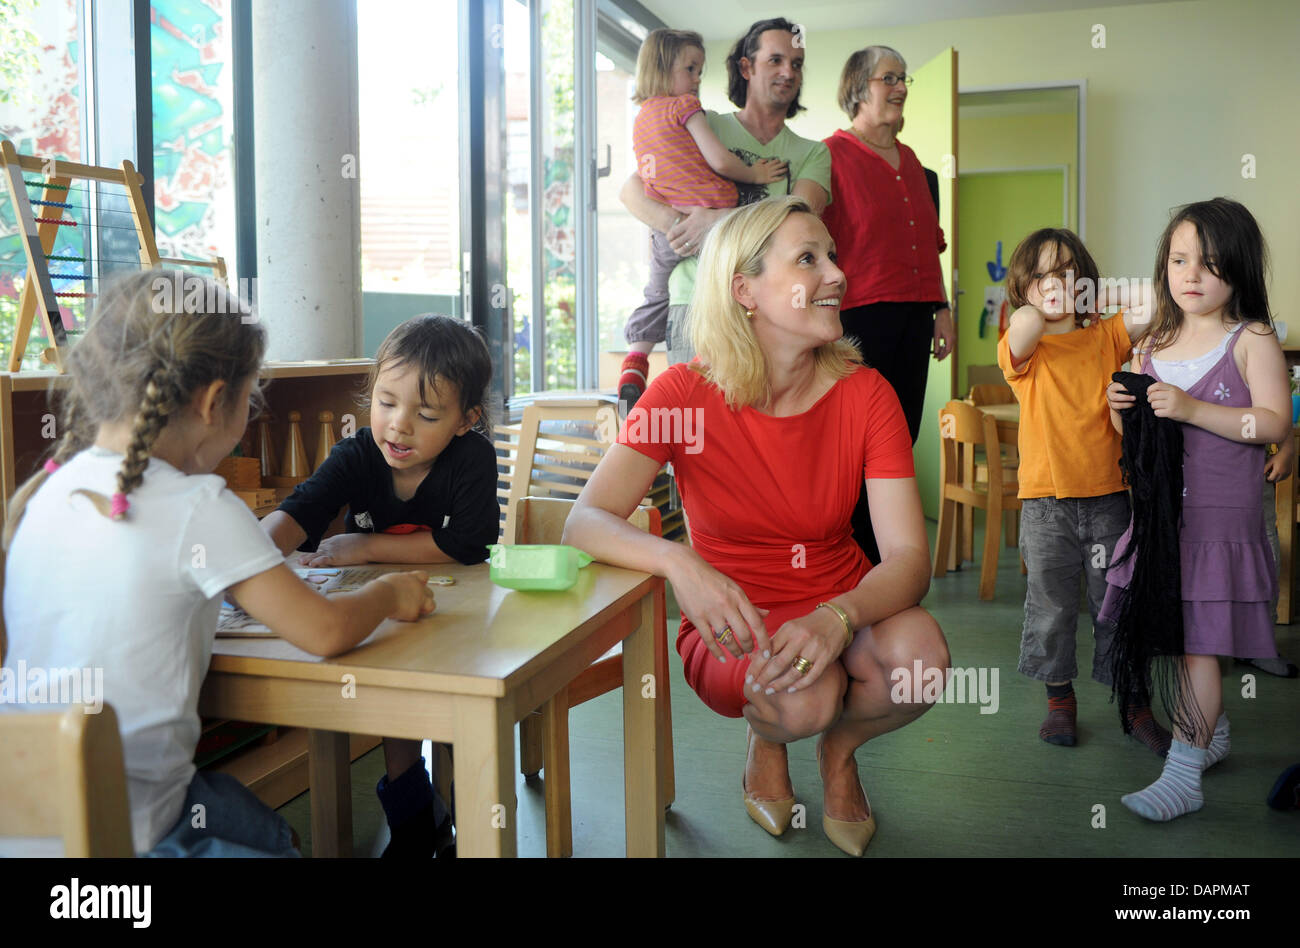 Bettina Wulff (M), wife of the German President, visits a Montessori kindergarten of the Bremen Home Foundation (Heimstiftung) in Bremen, Germany, 26 August 2011. The Home Foundation's house in Bremen is home of people of different generations. Photo: Ingo Wagner Stock Photo